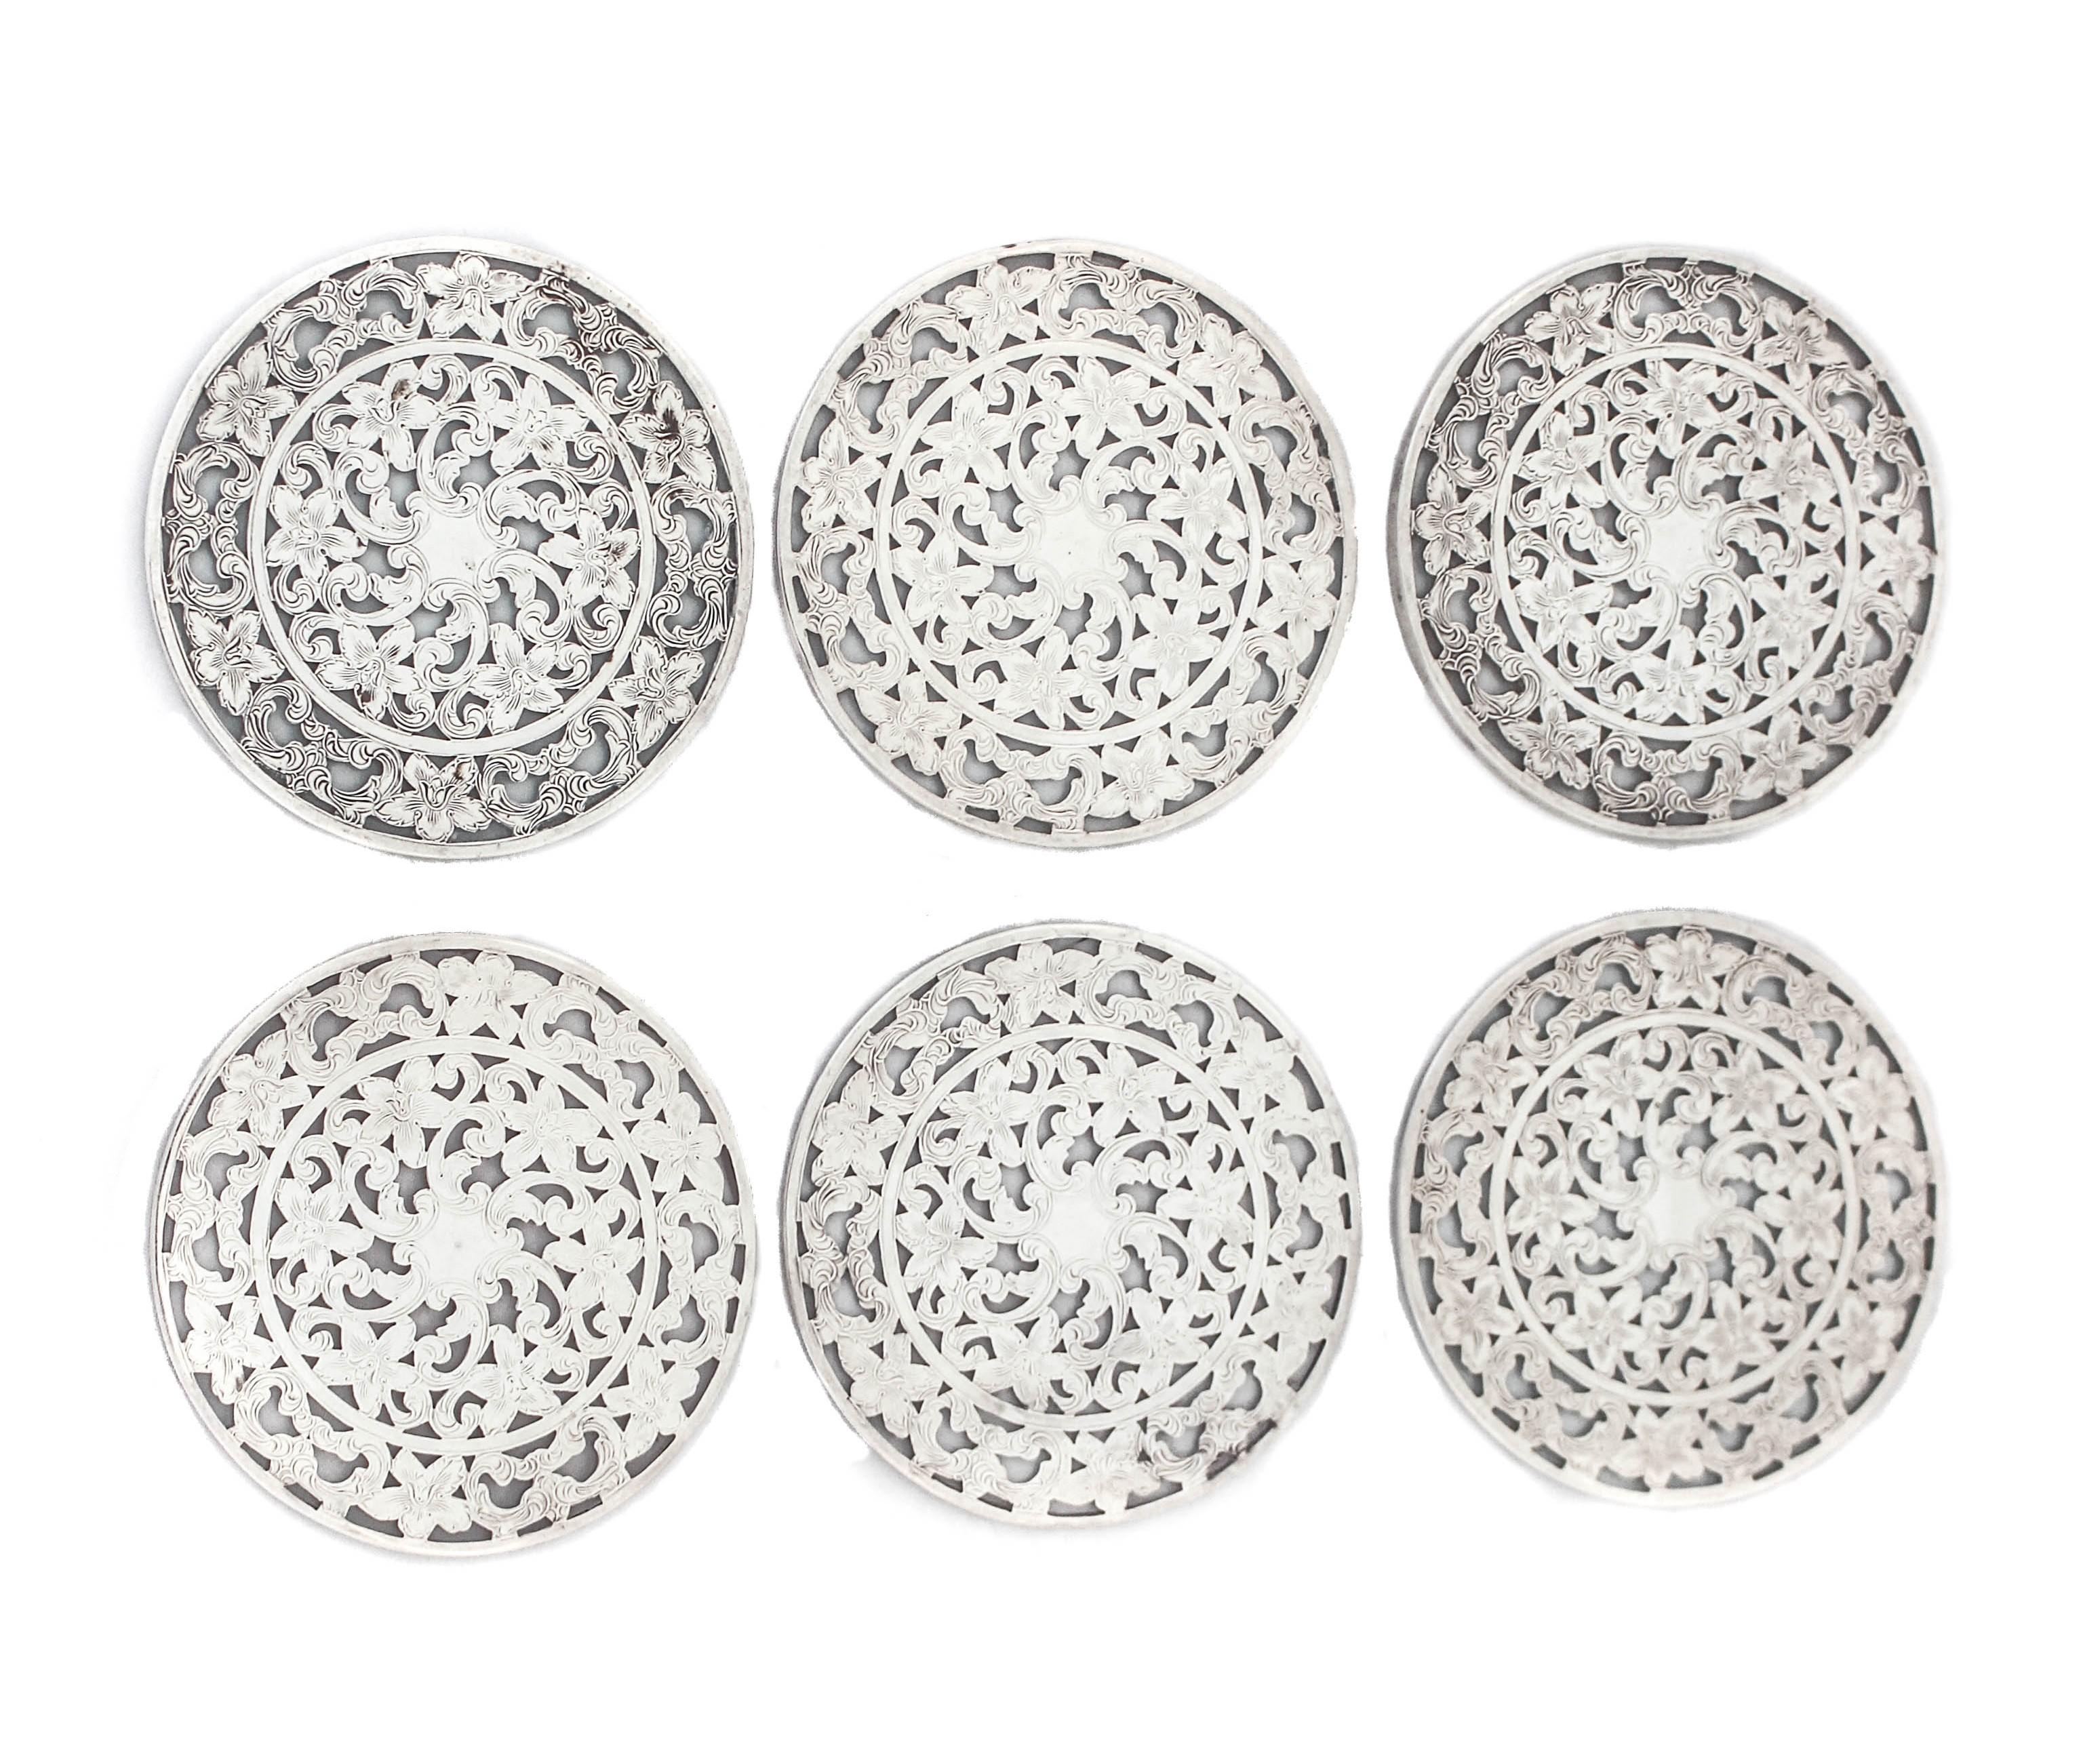 These sterling silver coasters are just what you need when entertaining. They have a beautiful open work design and a glass bottom. Made by the Webster Silver Company, they will protect your table from cups and glass stains. Stackable and easy to